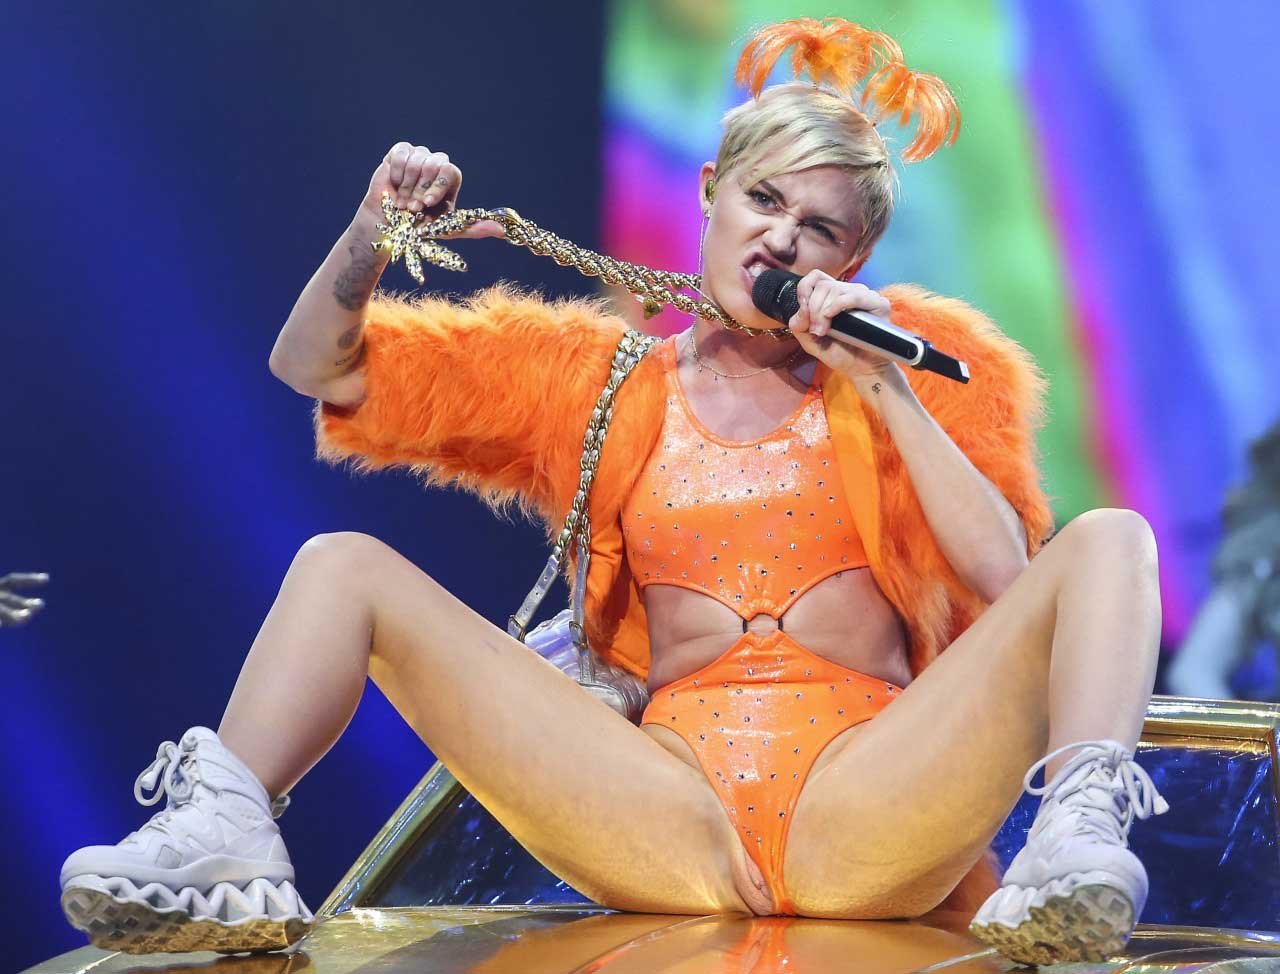 Miley Cyrus pussy slip on stage